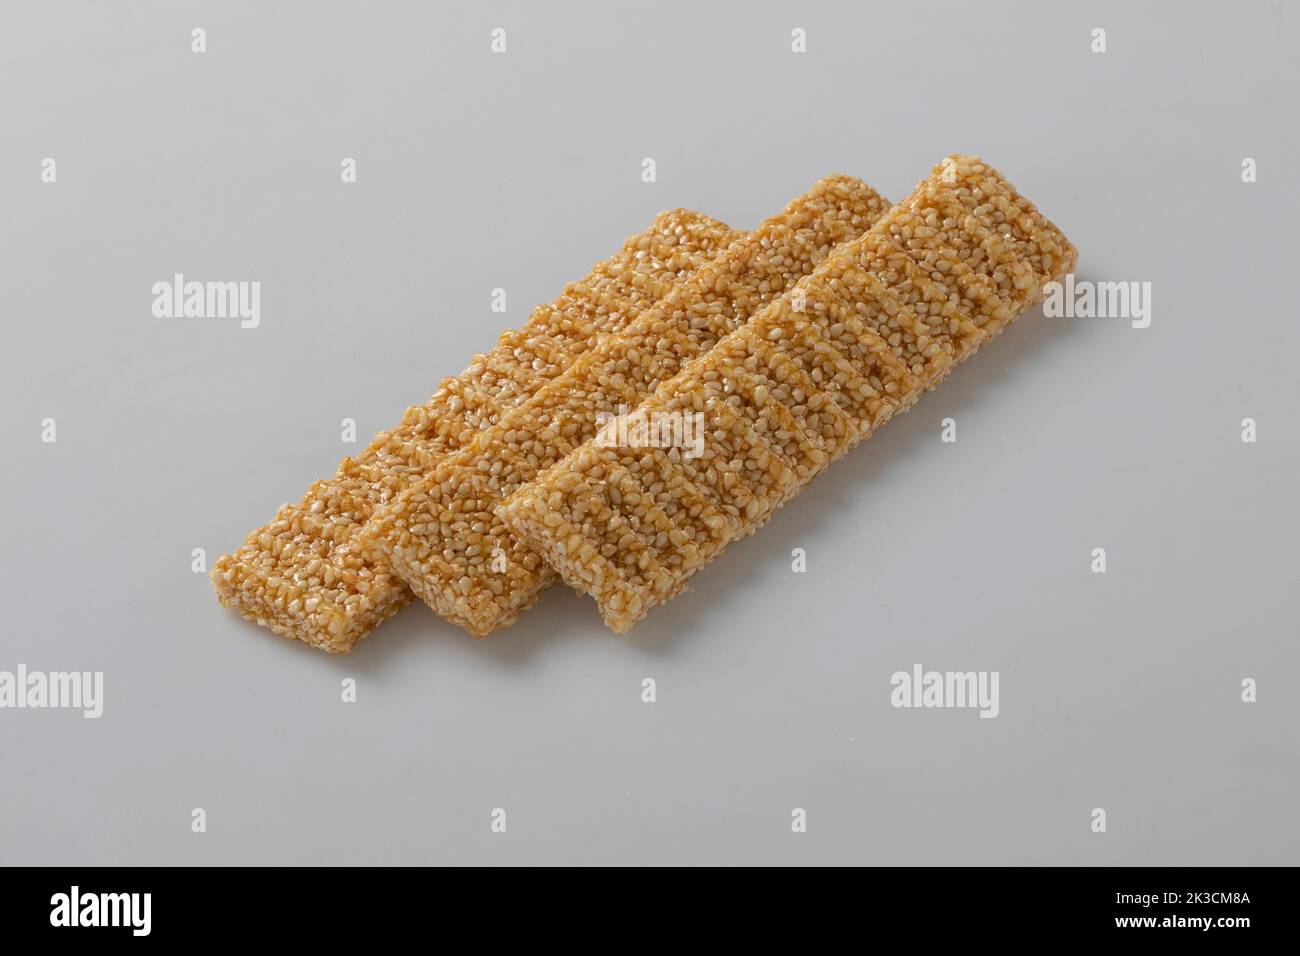 sesame seed candy bars, in a wooden bowl. Sesame brittle or crunch, a confection of sesame seeds and honey pressed into flat bars, a popular snack in Stock Photo